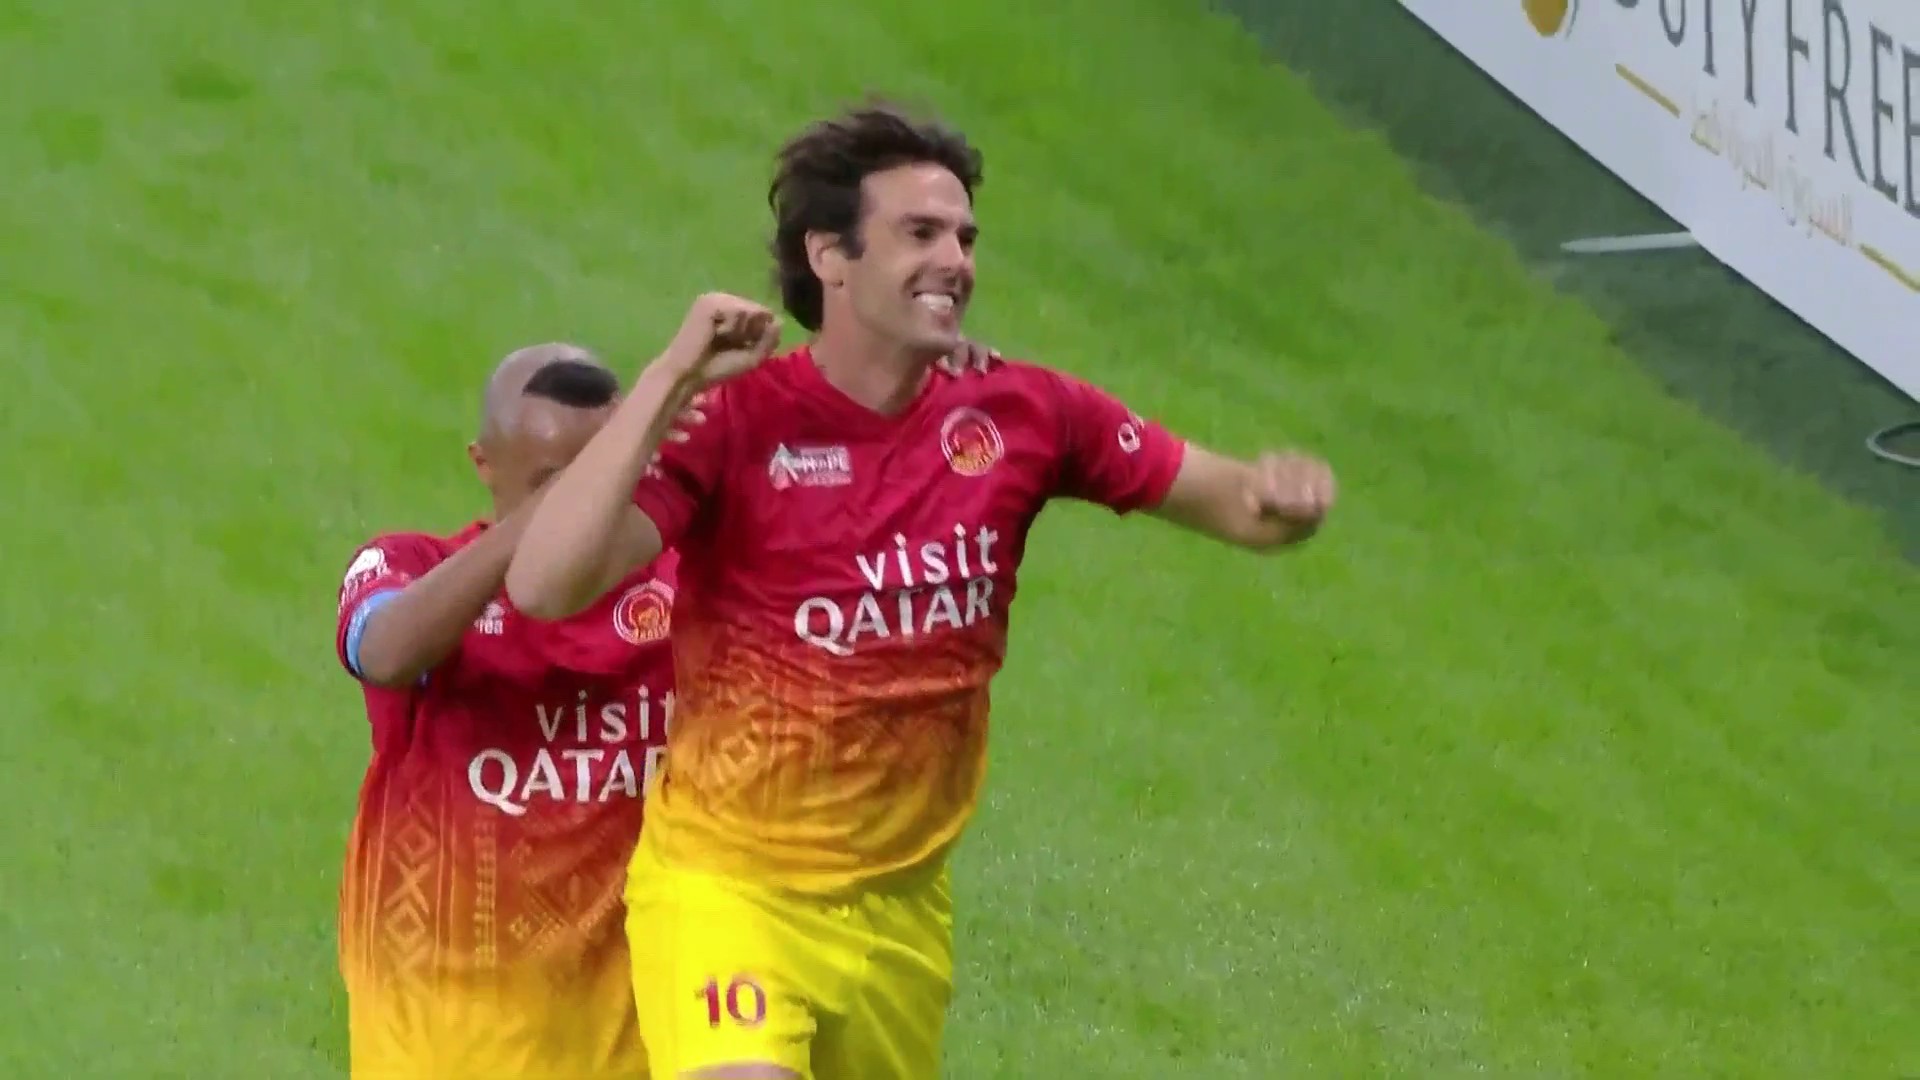 Watch: Kaka scores brilliant solo goal in the Match for Hope charity game